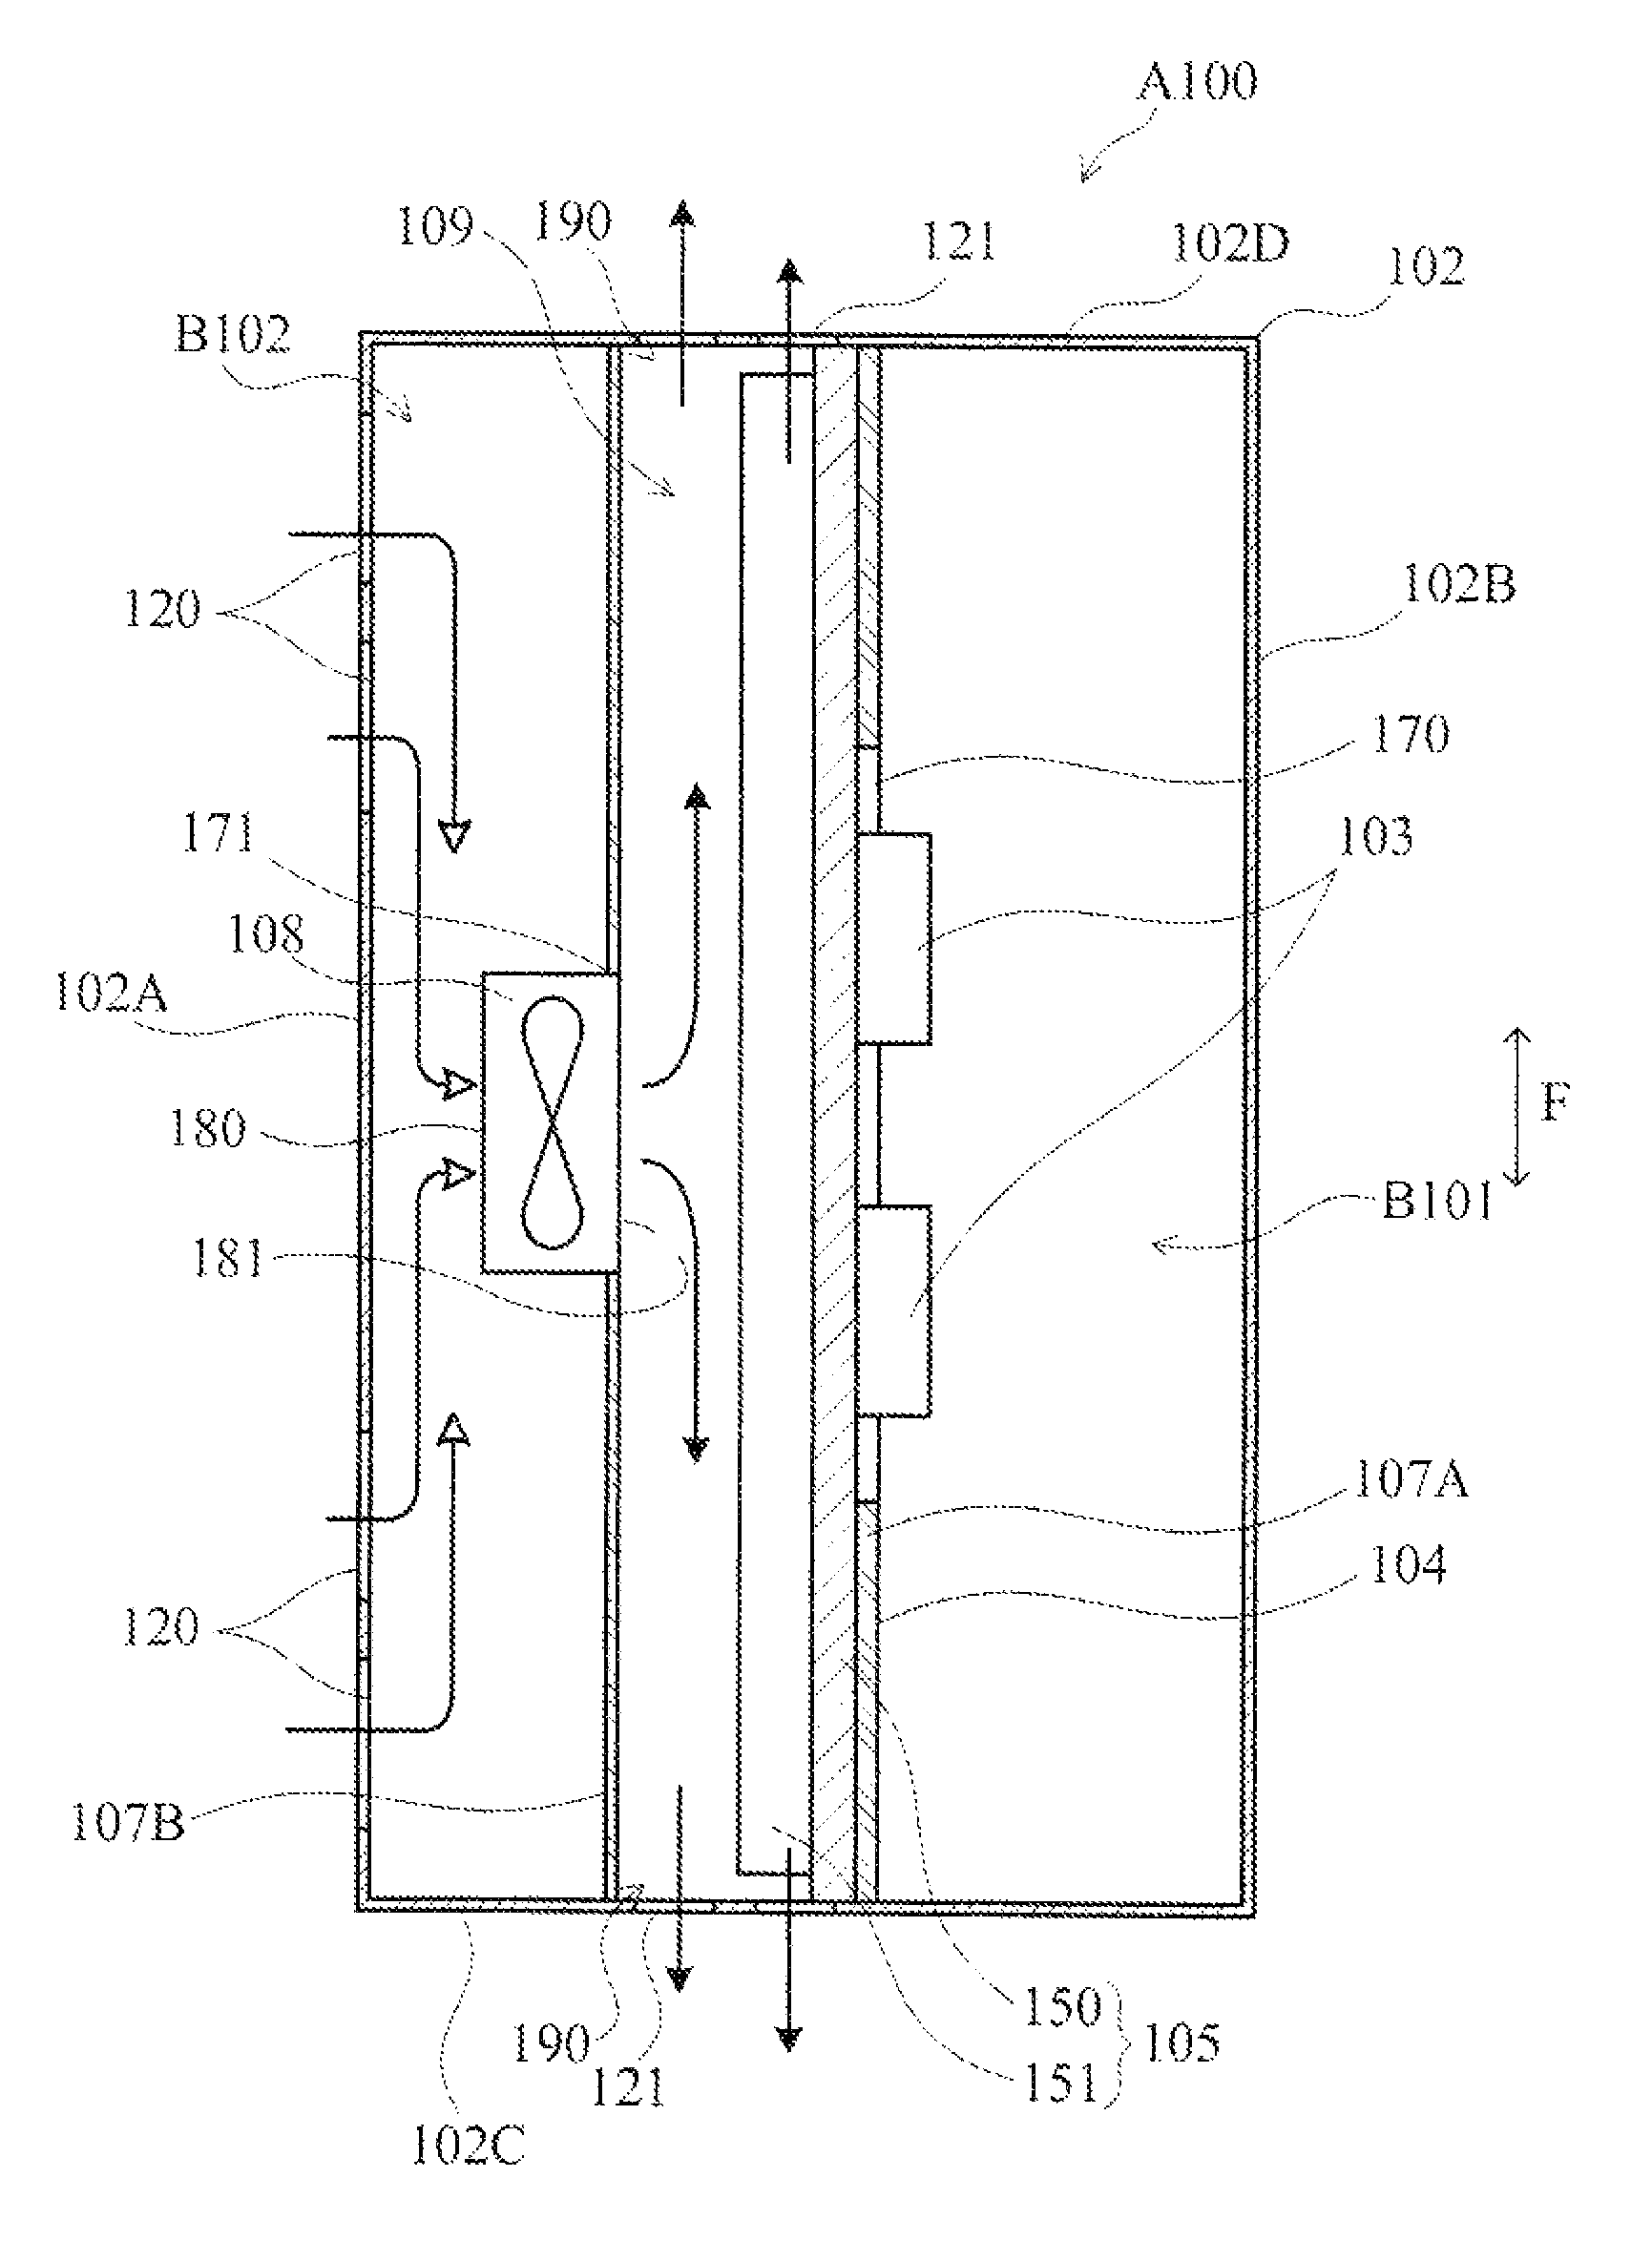 Power supply apparatus including fan for air cooling